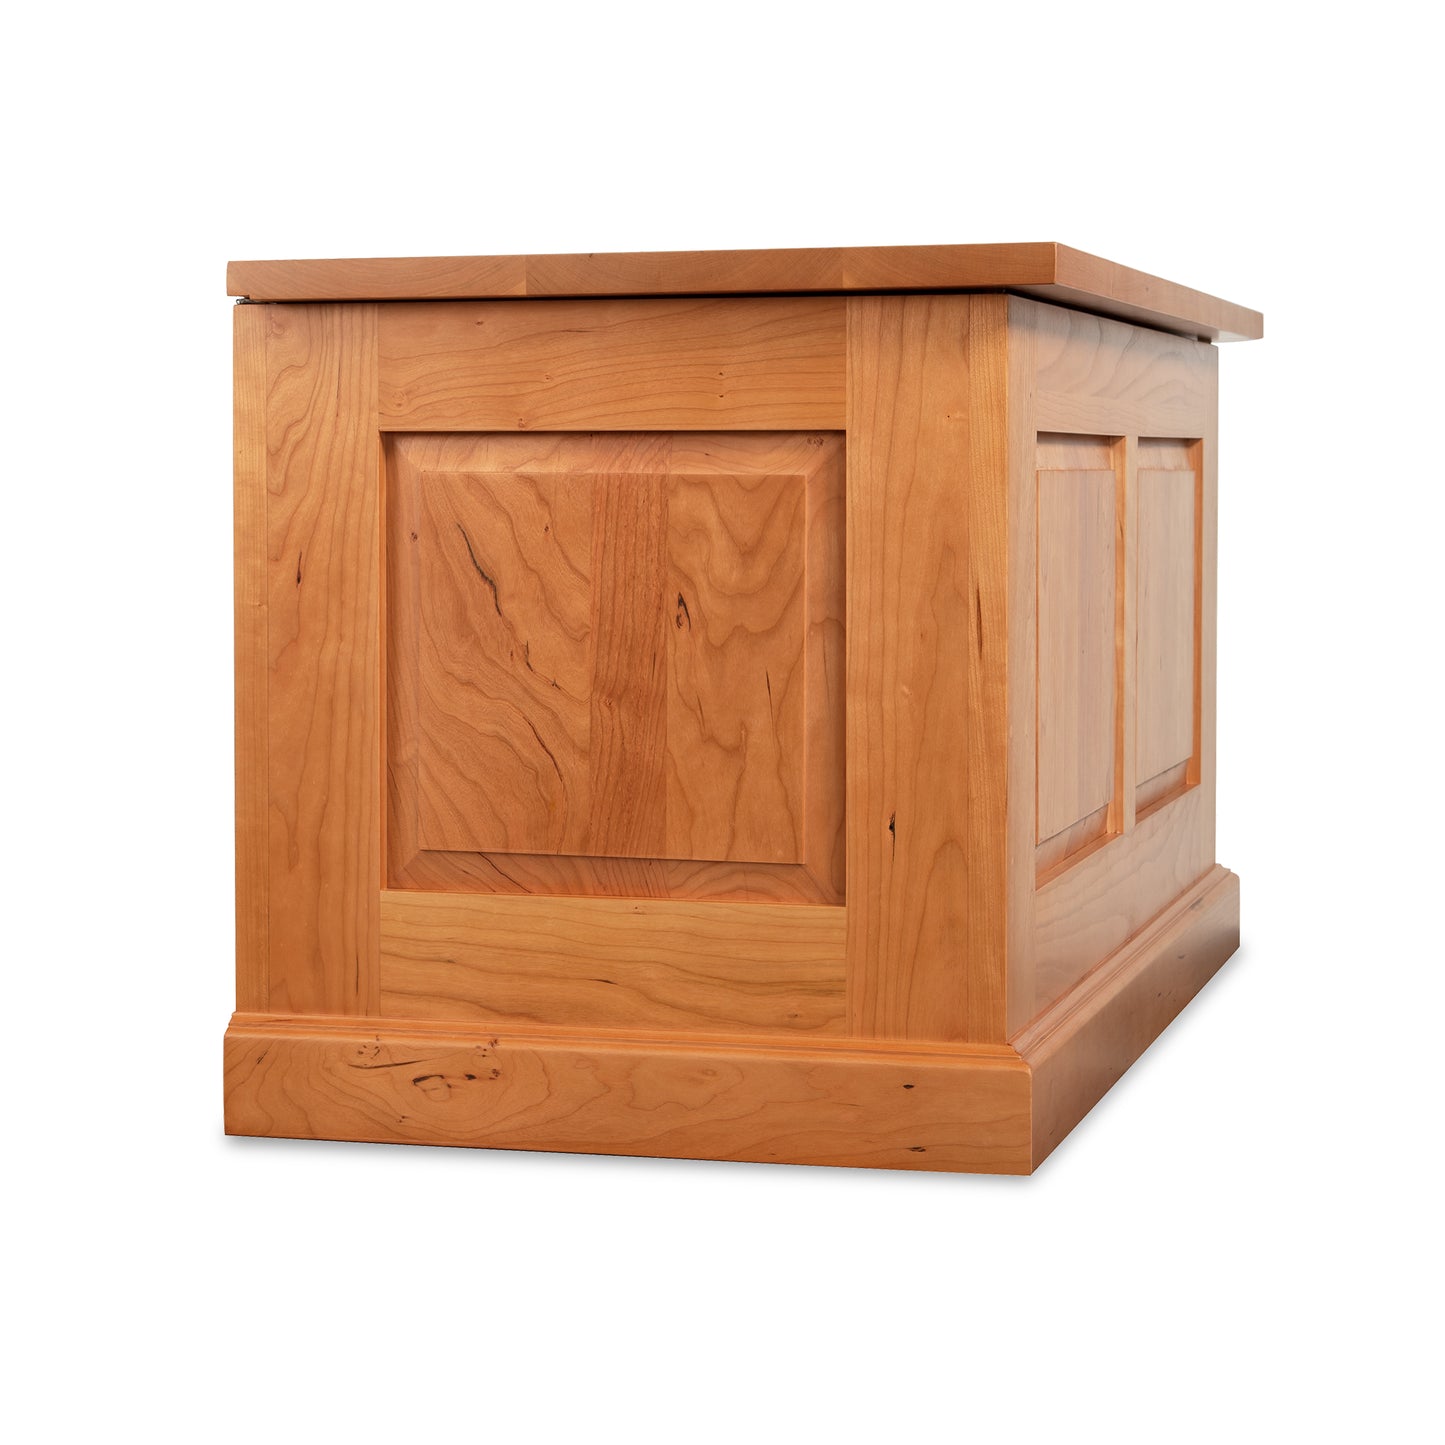 A sustainably harvested wooden box with a lid on it, made from North American hardwoods. This Lyndon Furniture New England Shaker Blanket Box is beautifully crafted and functional.